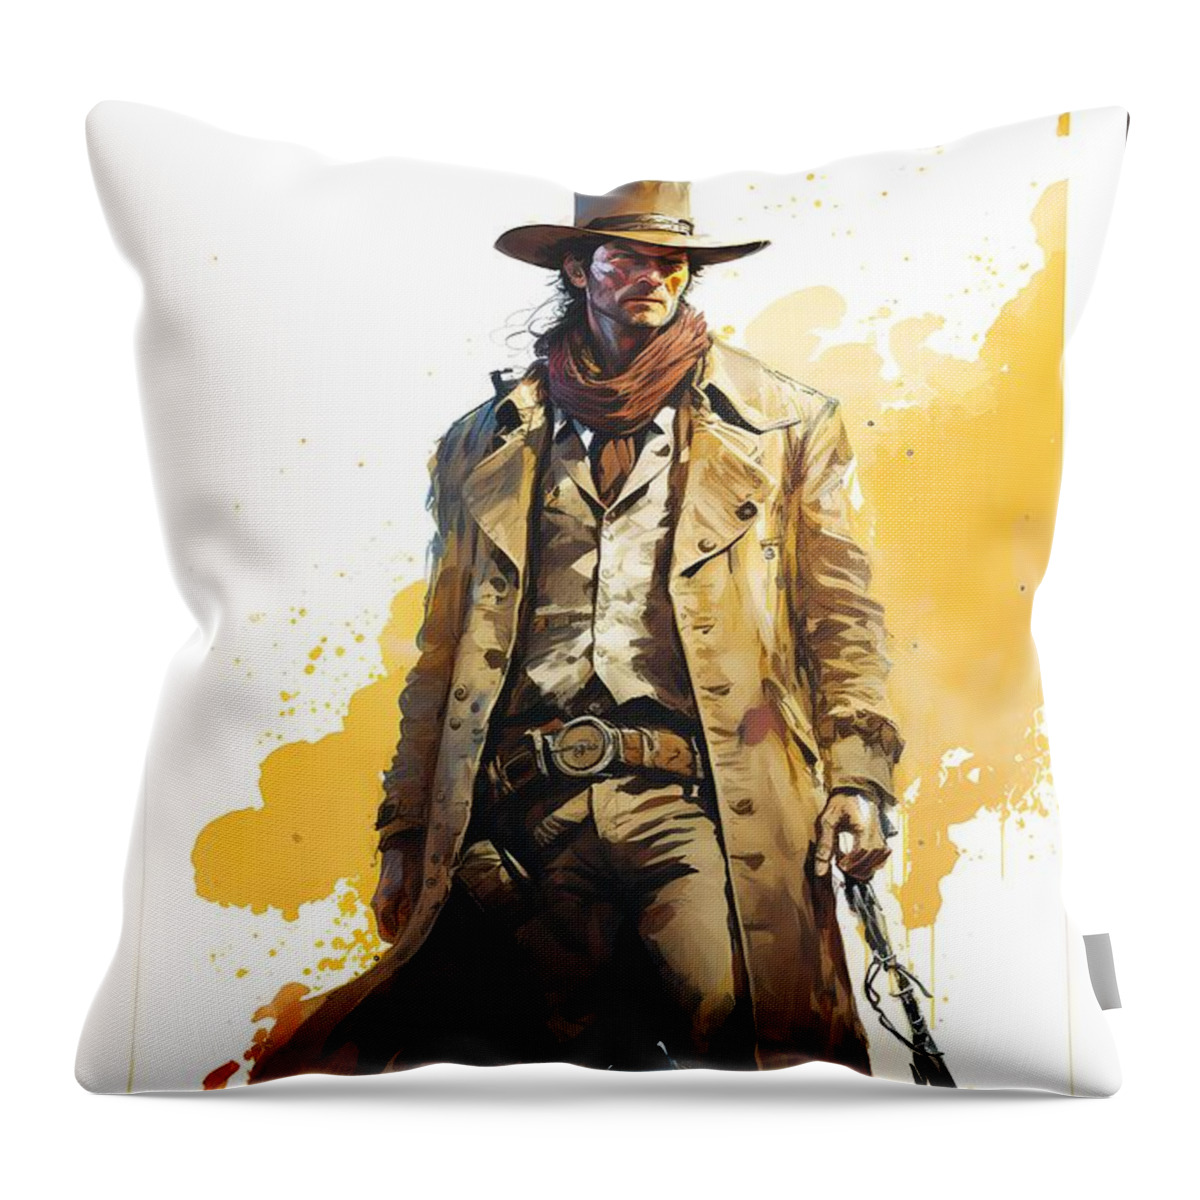 Rogue Jungle Cowboy Throw Pillow featuring the digital art Rogue Jungle Cowboy by Caito Junqueira